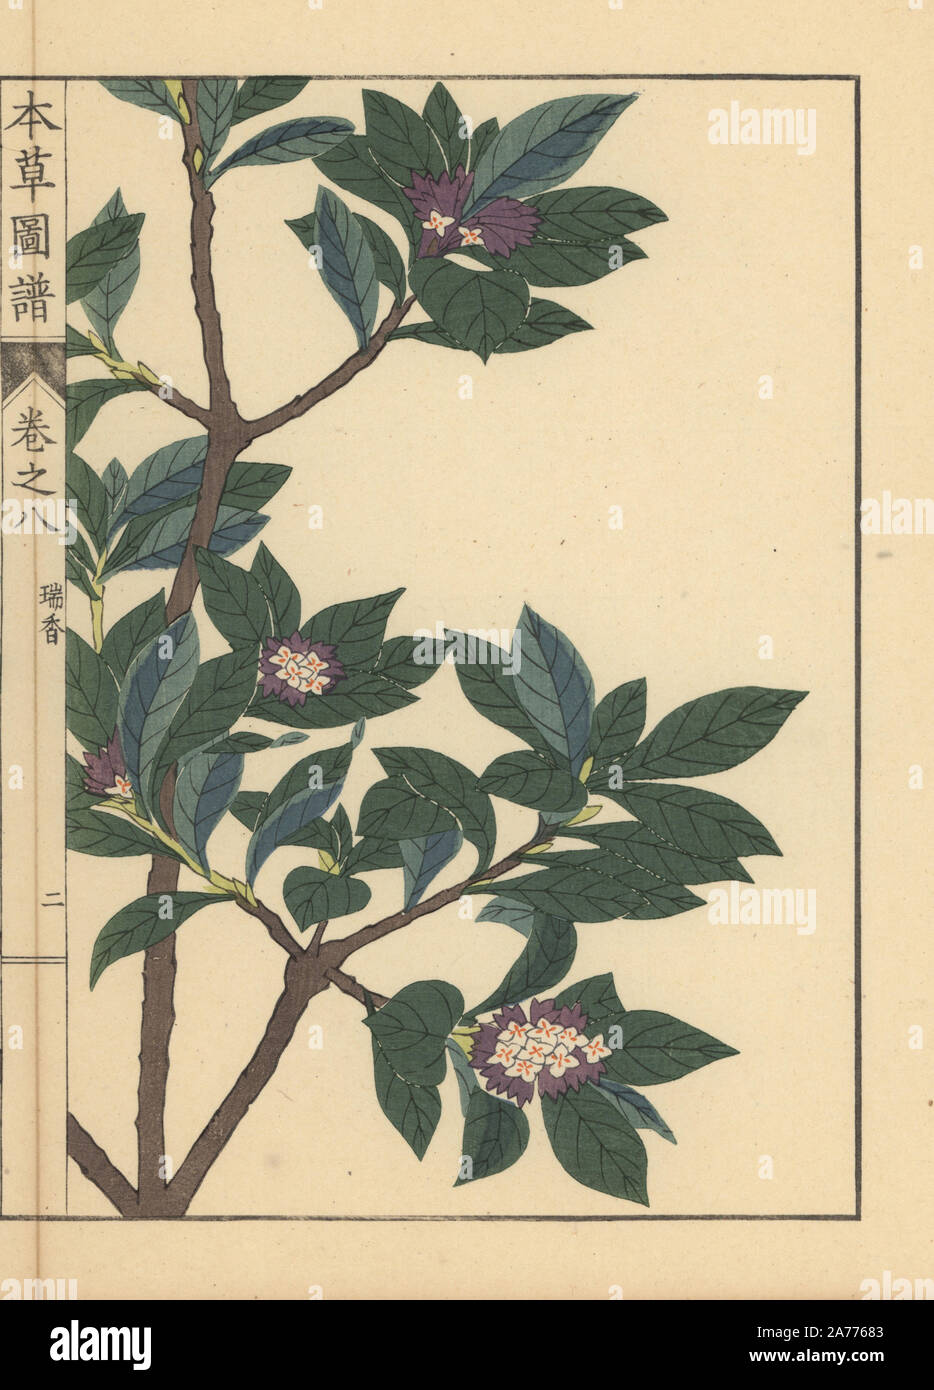 Winter daphne, Daphne odora Thunb. Colour-printed woodblock engraving by Kan'en Iwasaki from 'Honzo Zufu,' an Illustrated Guide to Medicinal Plants, Japan, 1884. Iwasaki (1786-1842) was a Japanese botanist, entomologist and zoologist. He was one of the first Japanese botanists to incorporate western knowledge into his studies. Stock Photo